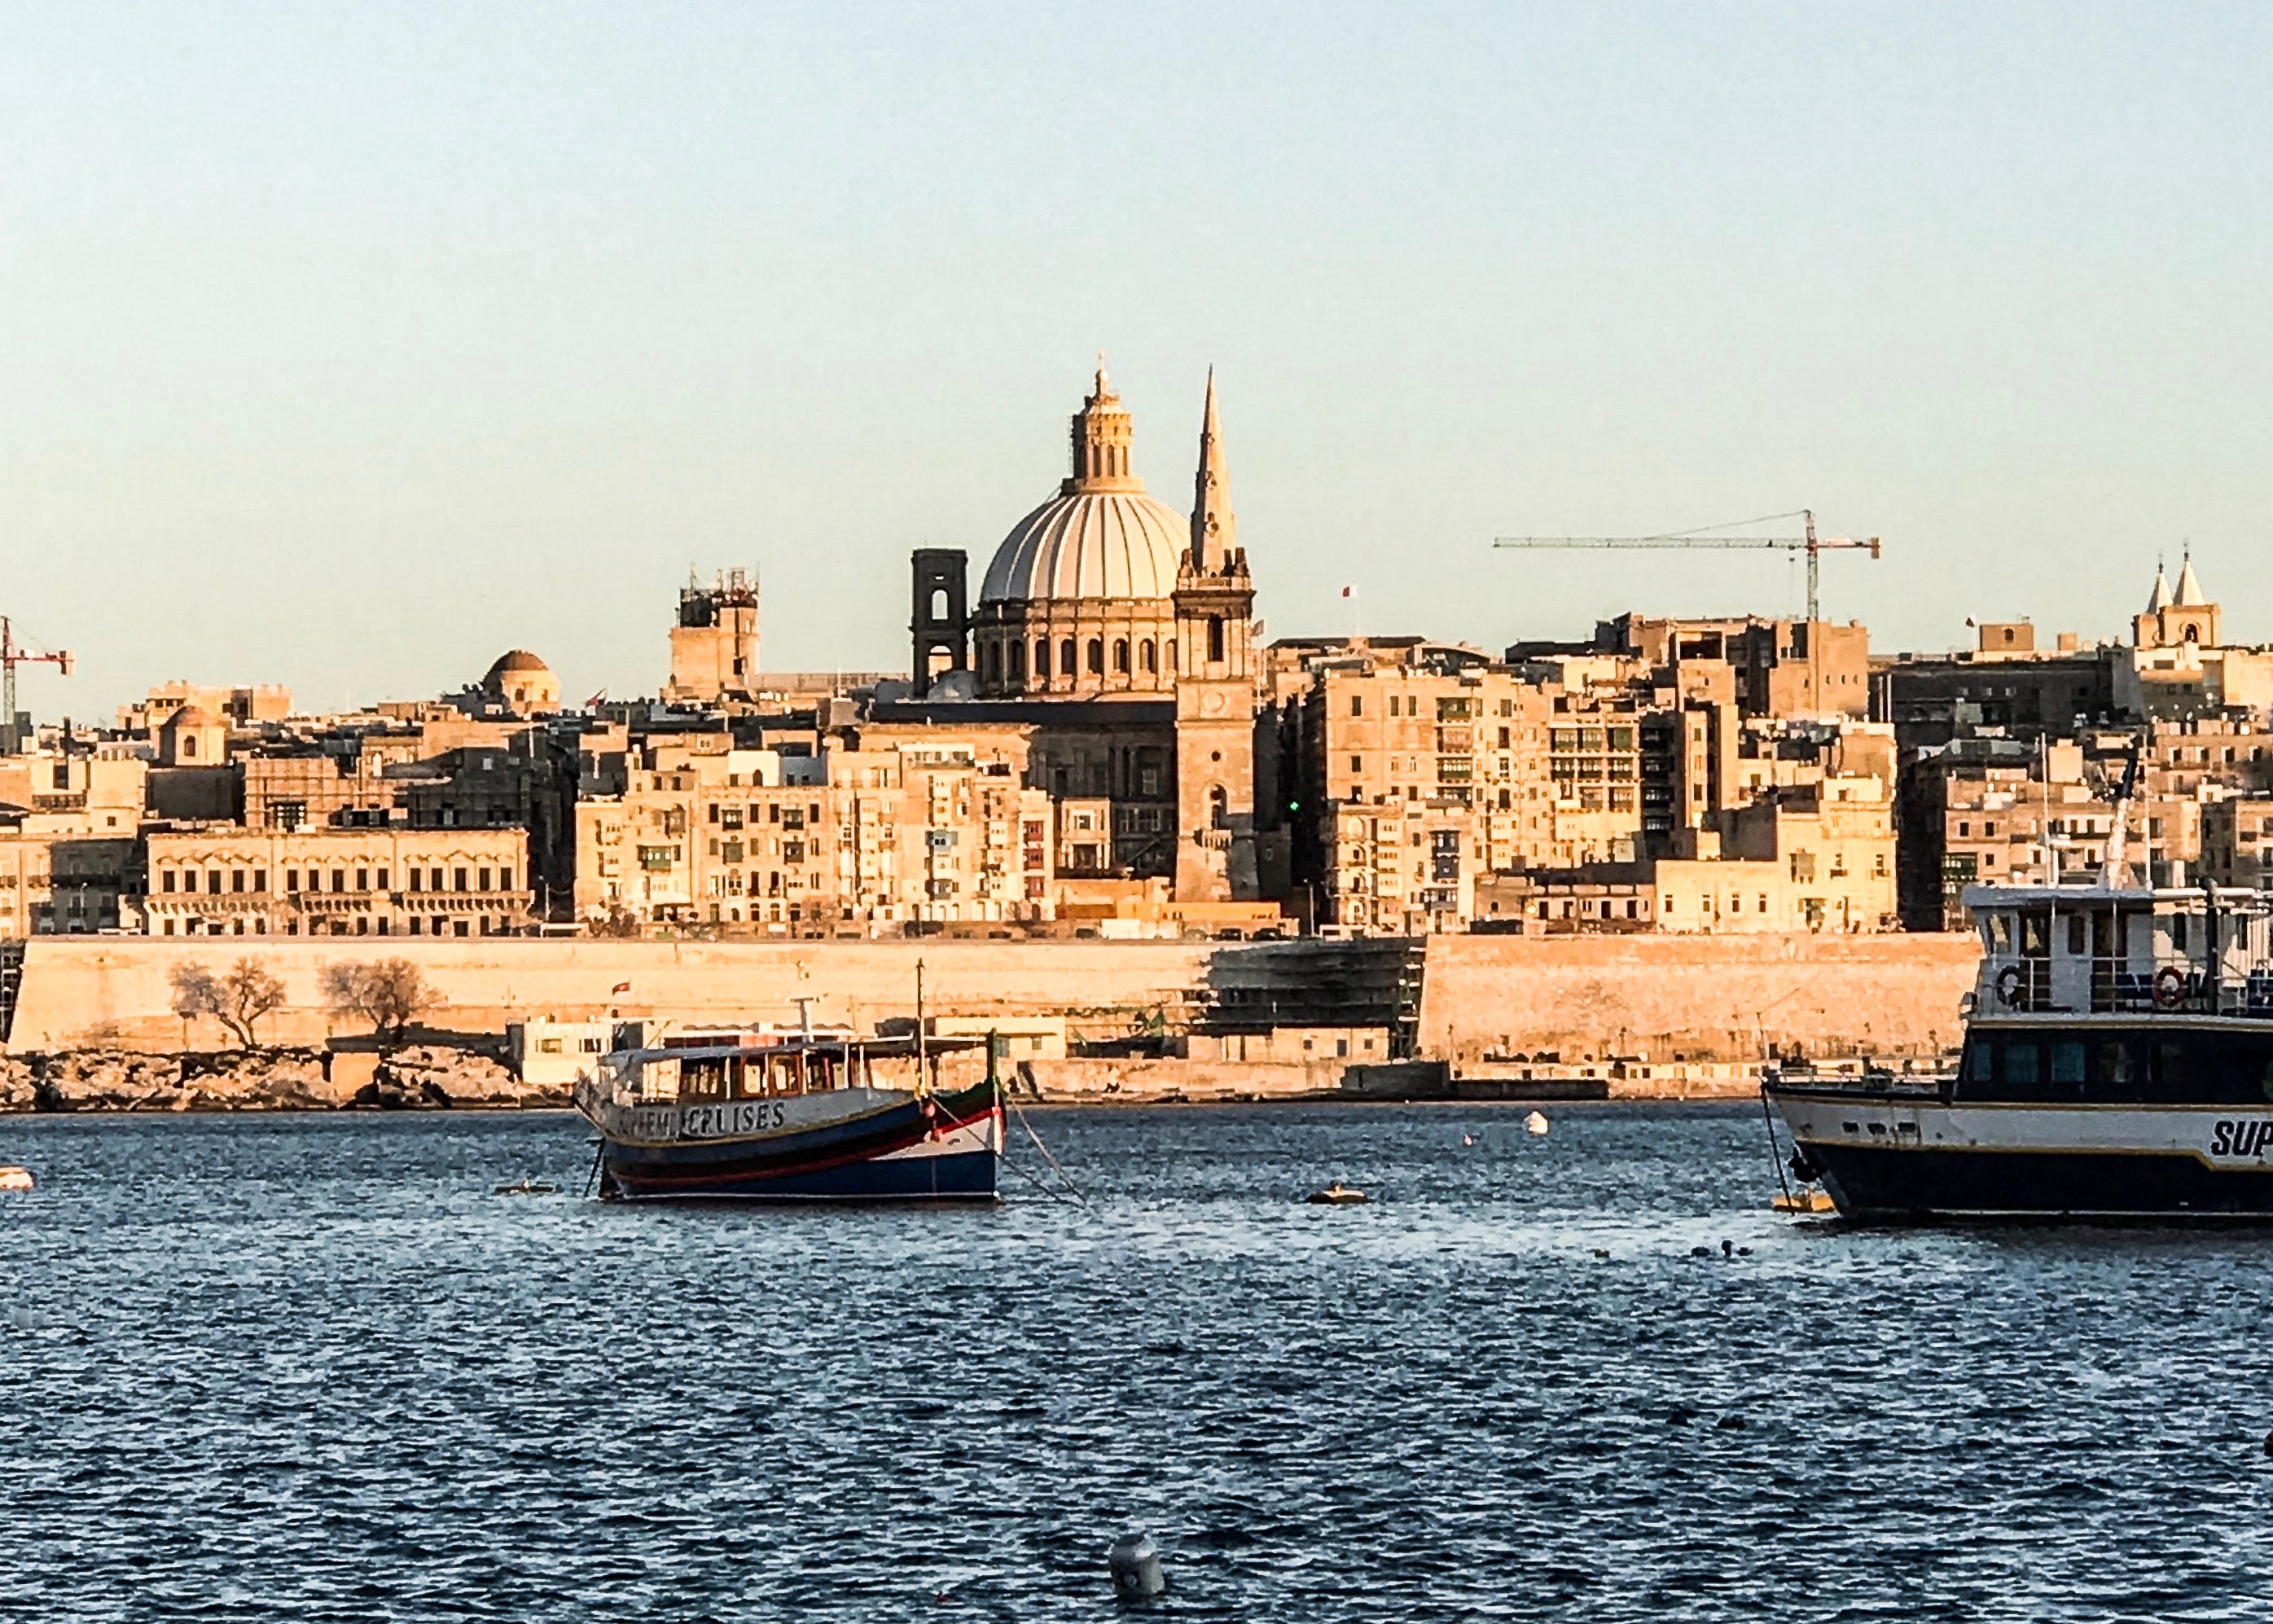 Valletta, Malta. Photo by Ines Bahr from Pexels https://www.pexels.com/photo/two-ship-on-body-of-water-near-buildings-2098179/